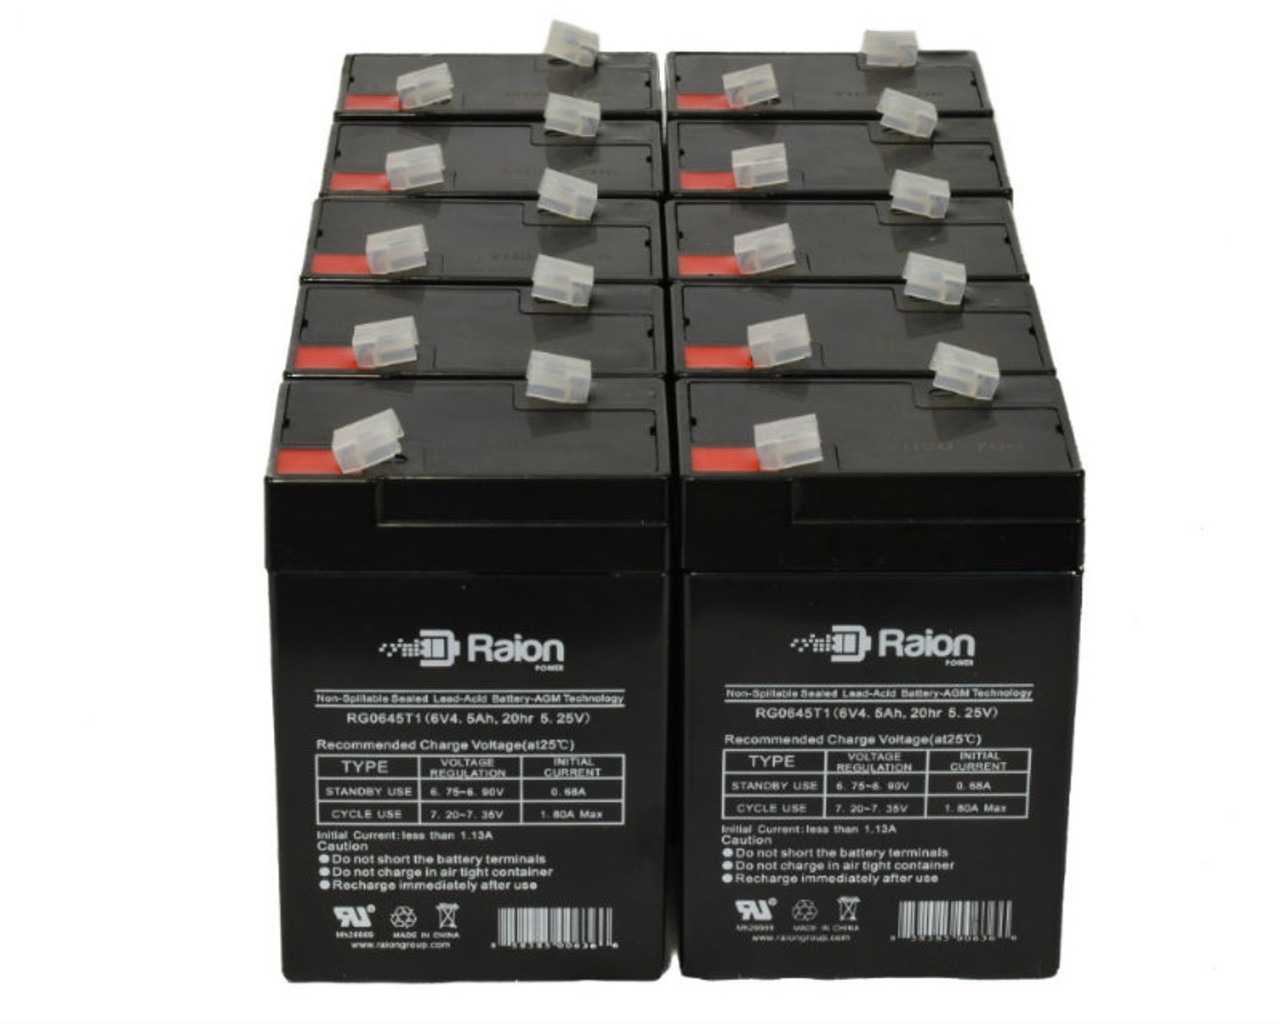 Raion Power RG0645T1 6V 4.5Ah Replacement Medical Equipment Battery for Mcgaw 521 Plus - 10 Pack